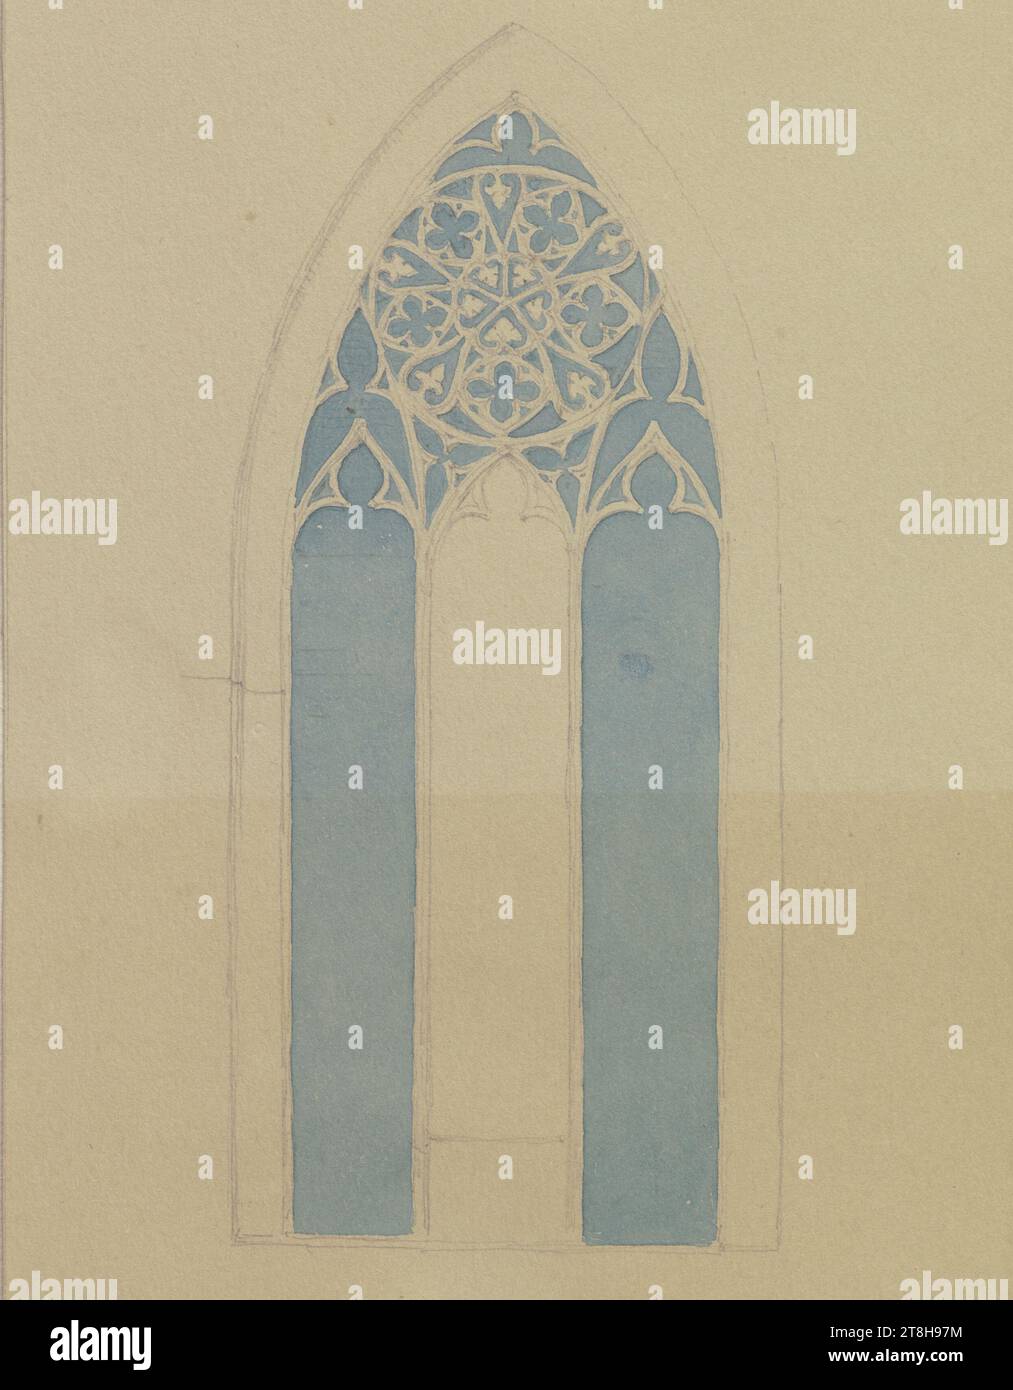 CARL THEODOR REIFFENSTEIN, tracery window of the fountain chapel of the Maulbronn monastery, August 12, 1871, sheet, 152 x 115 mm, pencil, watercolored, on paper, tracery window of the fountain chapel of the Maulbronn monastery, CARL THEODOR REIFFENSTEIN, page, adhesive tapes, volume 30, page 49, part number / total, 1 / 3, MAULBRONN MONASTERY, 19TH CENTURY, DRAWING, pencil, watercolored, on paper, GRAPHITE-CLAY MIXTURE, WATERCOLOR, PAPER, PENCIL DRAWING, WATERCOLOR, GERMAN, ARCHITECTURAL STUDY, TRACING, TRAVEL STUDY, Dated lower left, in pencil, Aug 12, 1871.; Inscribed lower right Stock Photo